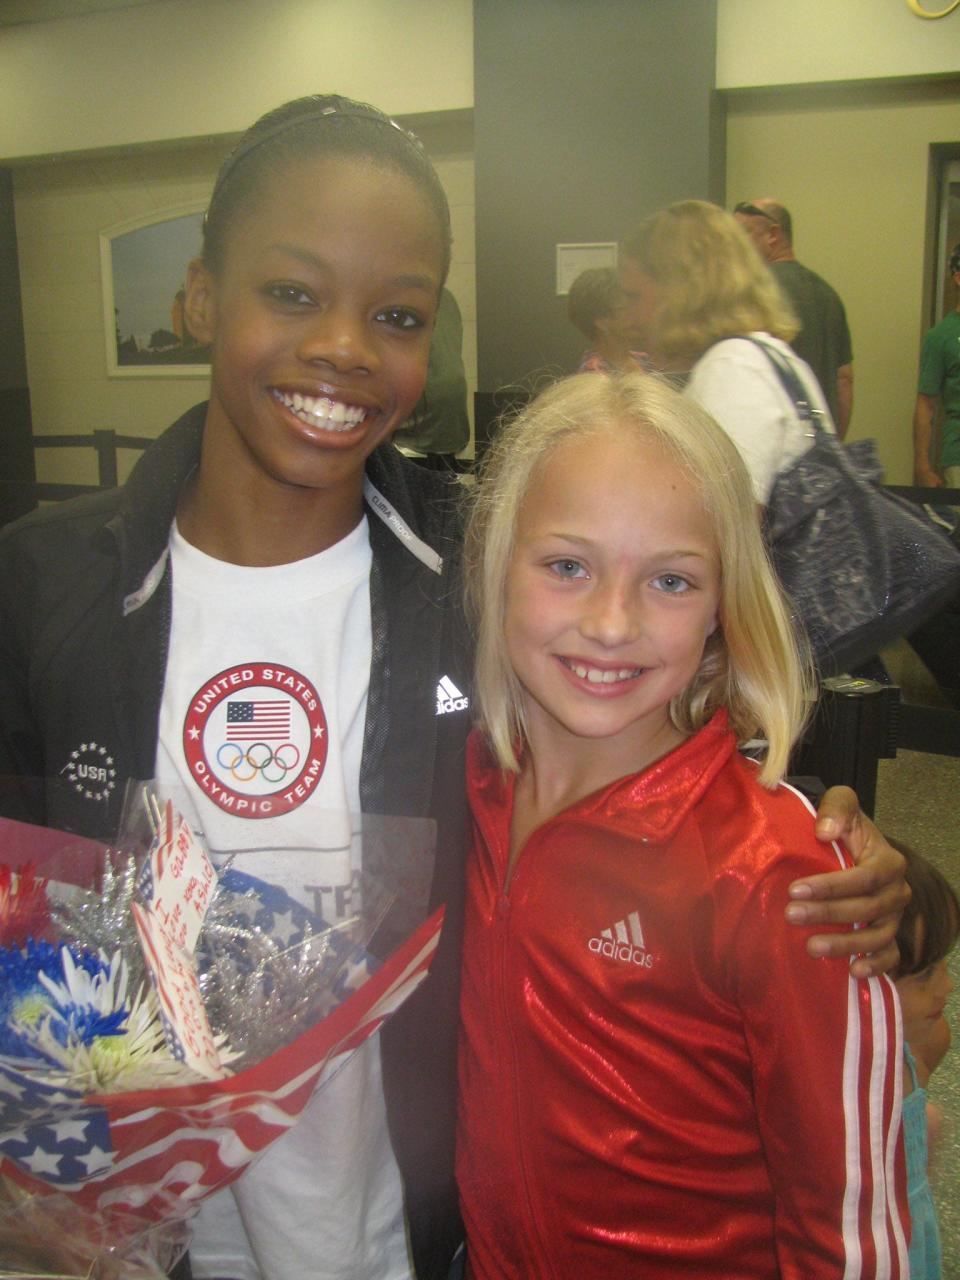 Future Drake basketball star Katie Dinnebier, right, is pictured with Olympic gymnast Gabby Douglas, who also trained at Chow’s Gymnastics & Dance Institute in West Des Moines.